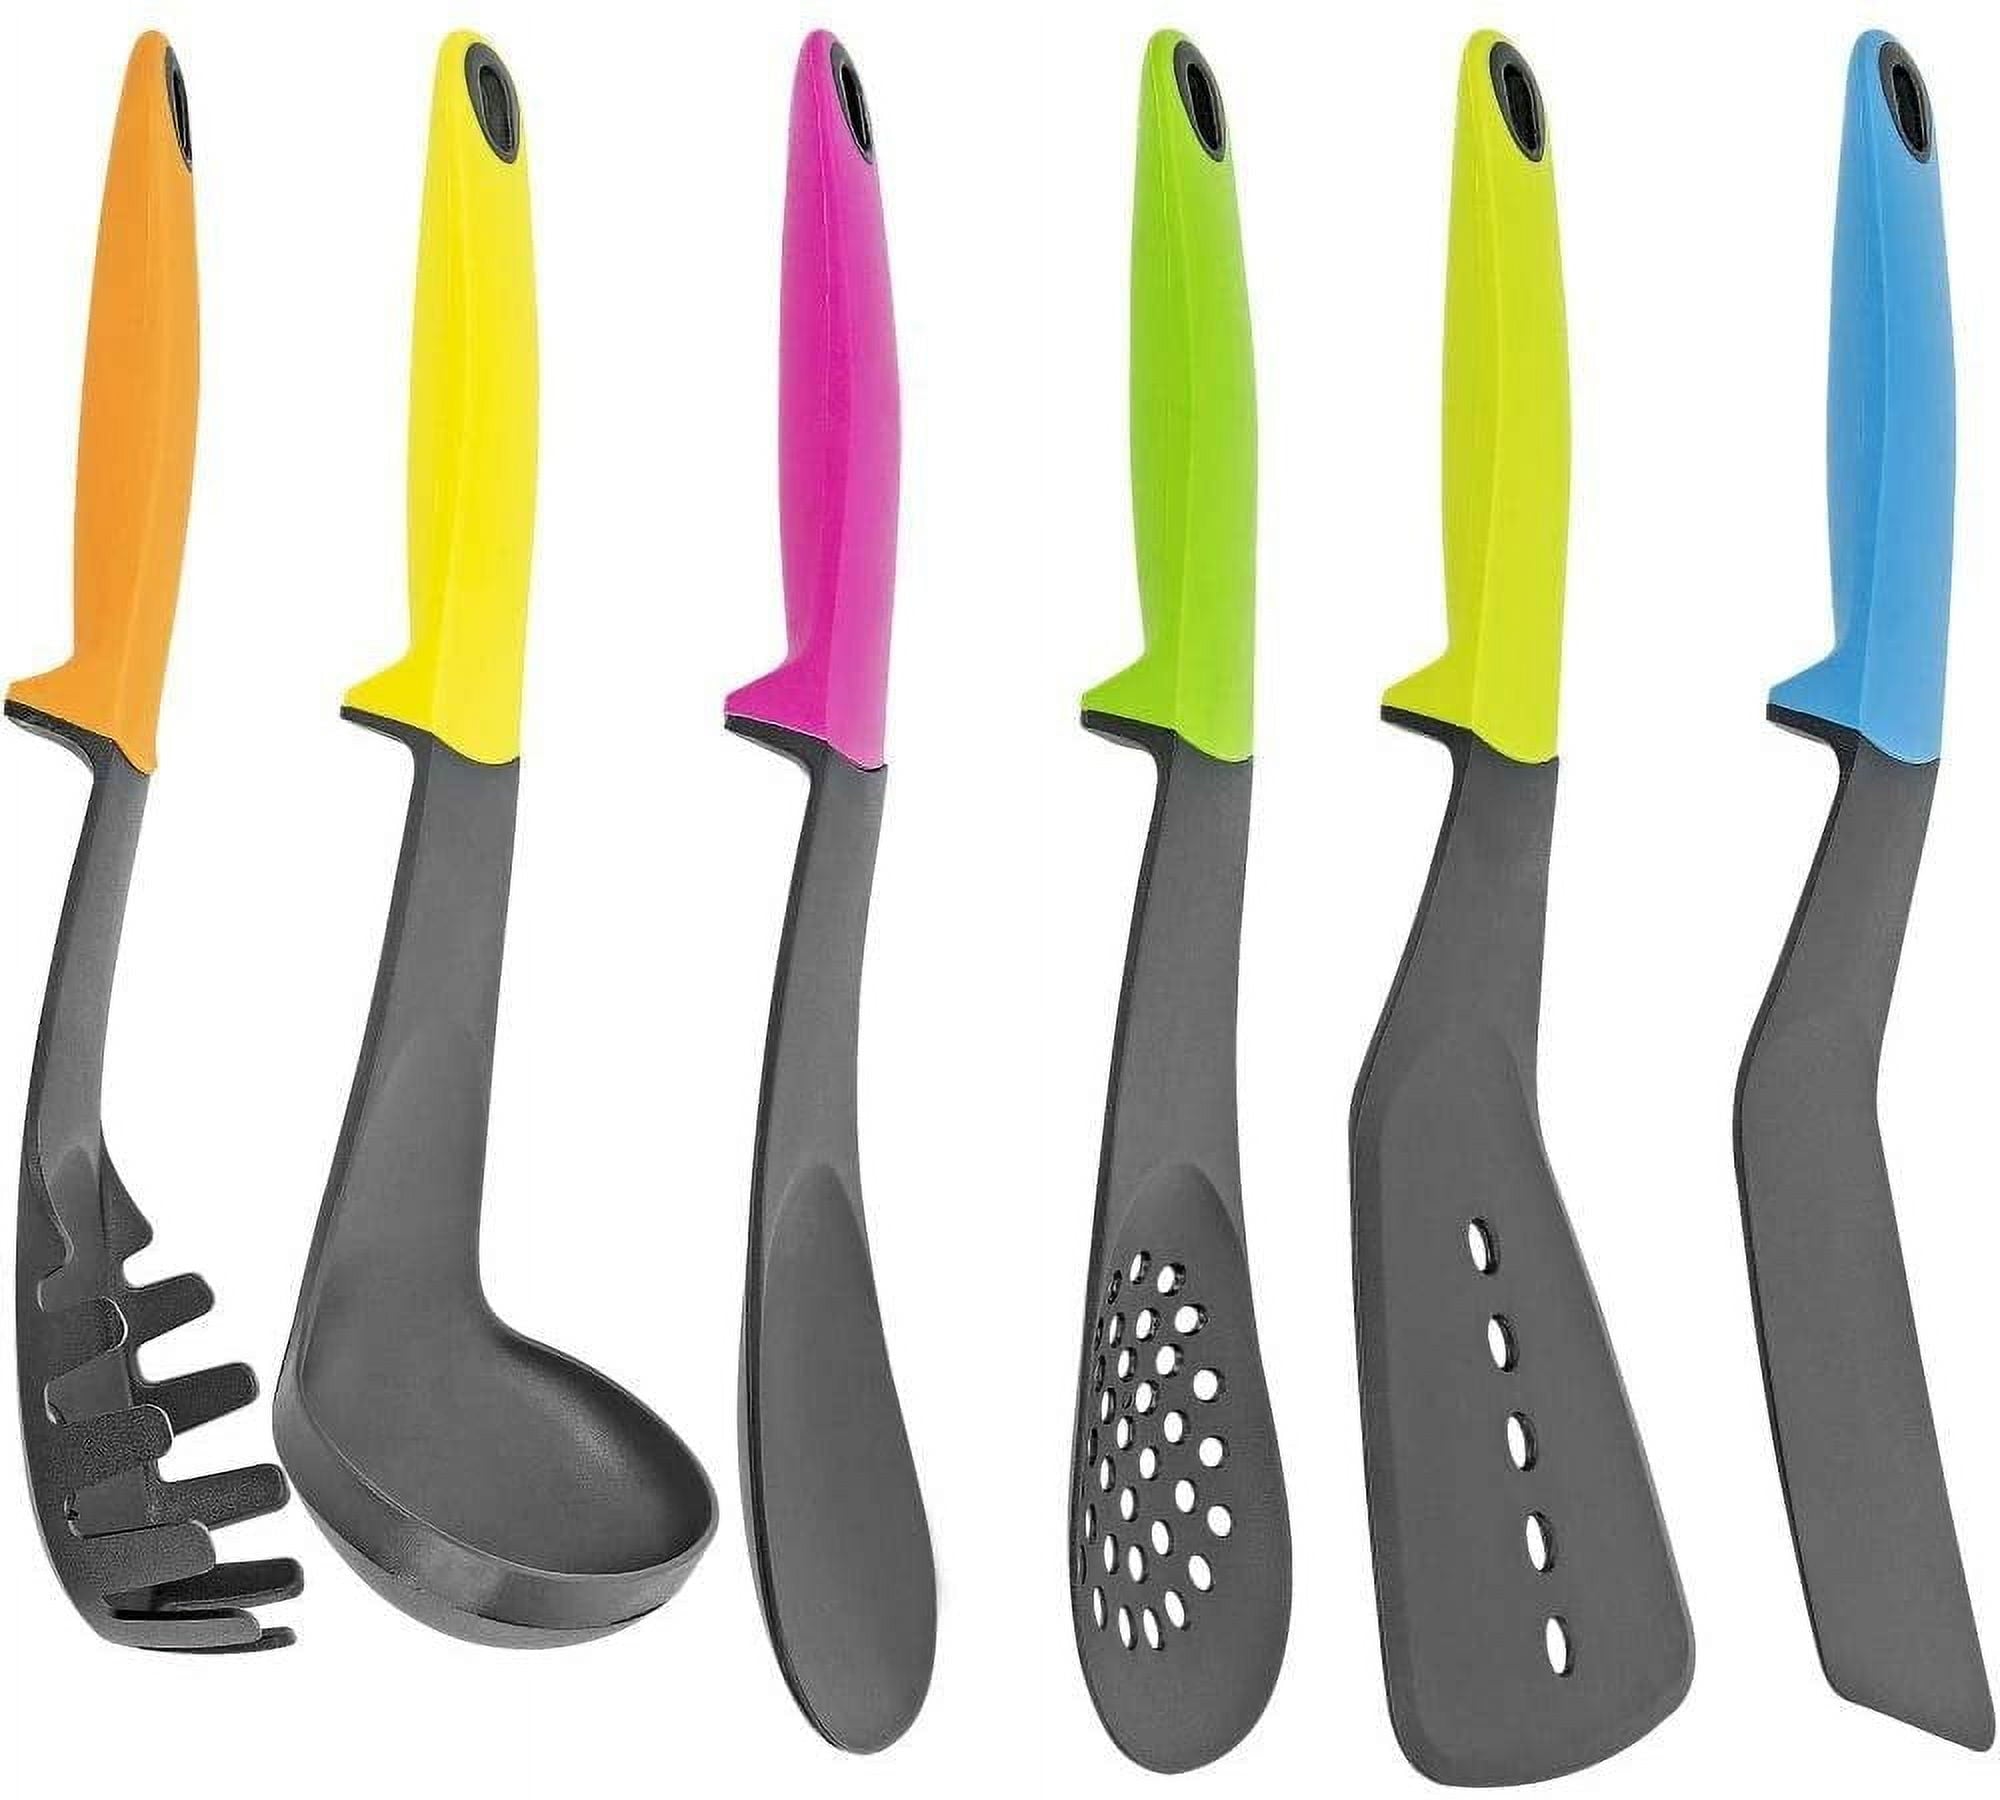 Set of 7 Kitchen Utensils w/Holder, Silicone Handles - Includes Ladle, Spatula, Spoon, Spaghetti Server, and More